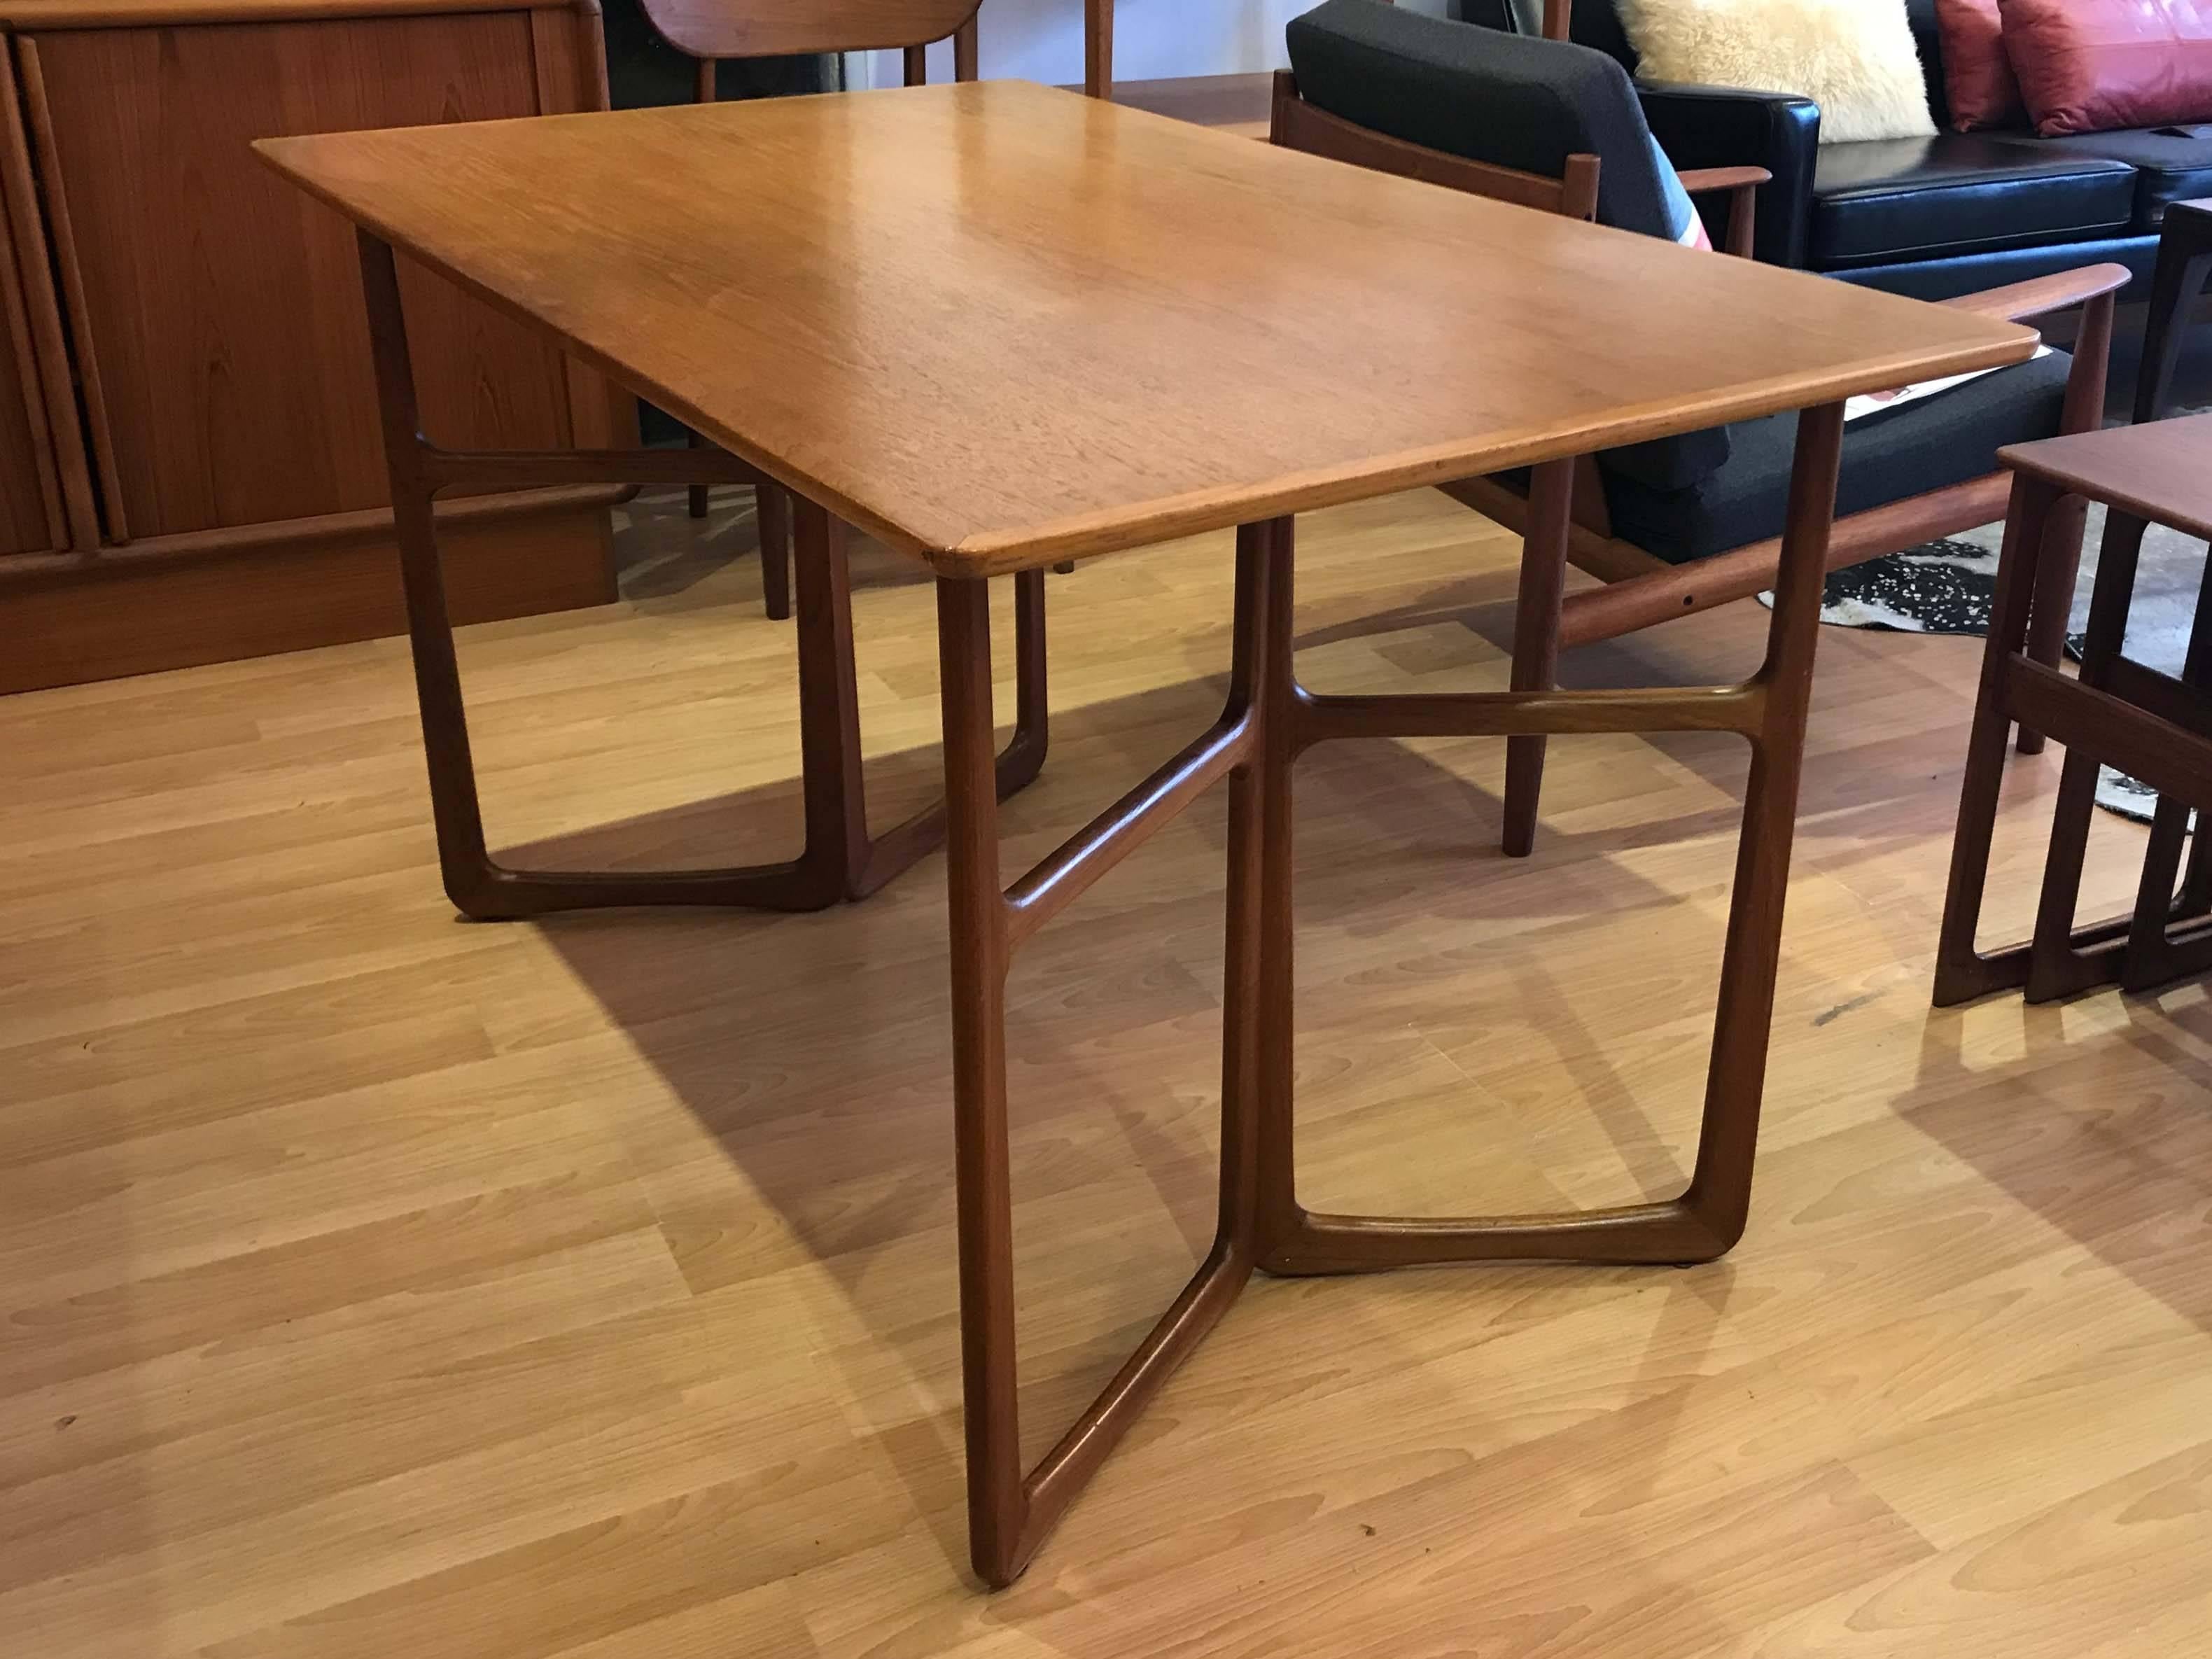 Compact dining table attributed to Peter Hvidt. Very good original condition, not marked.